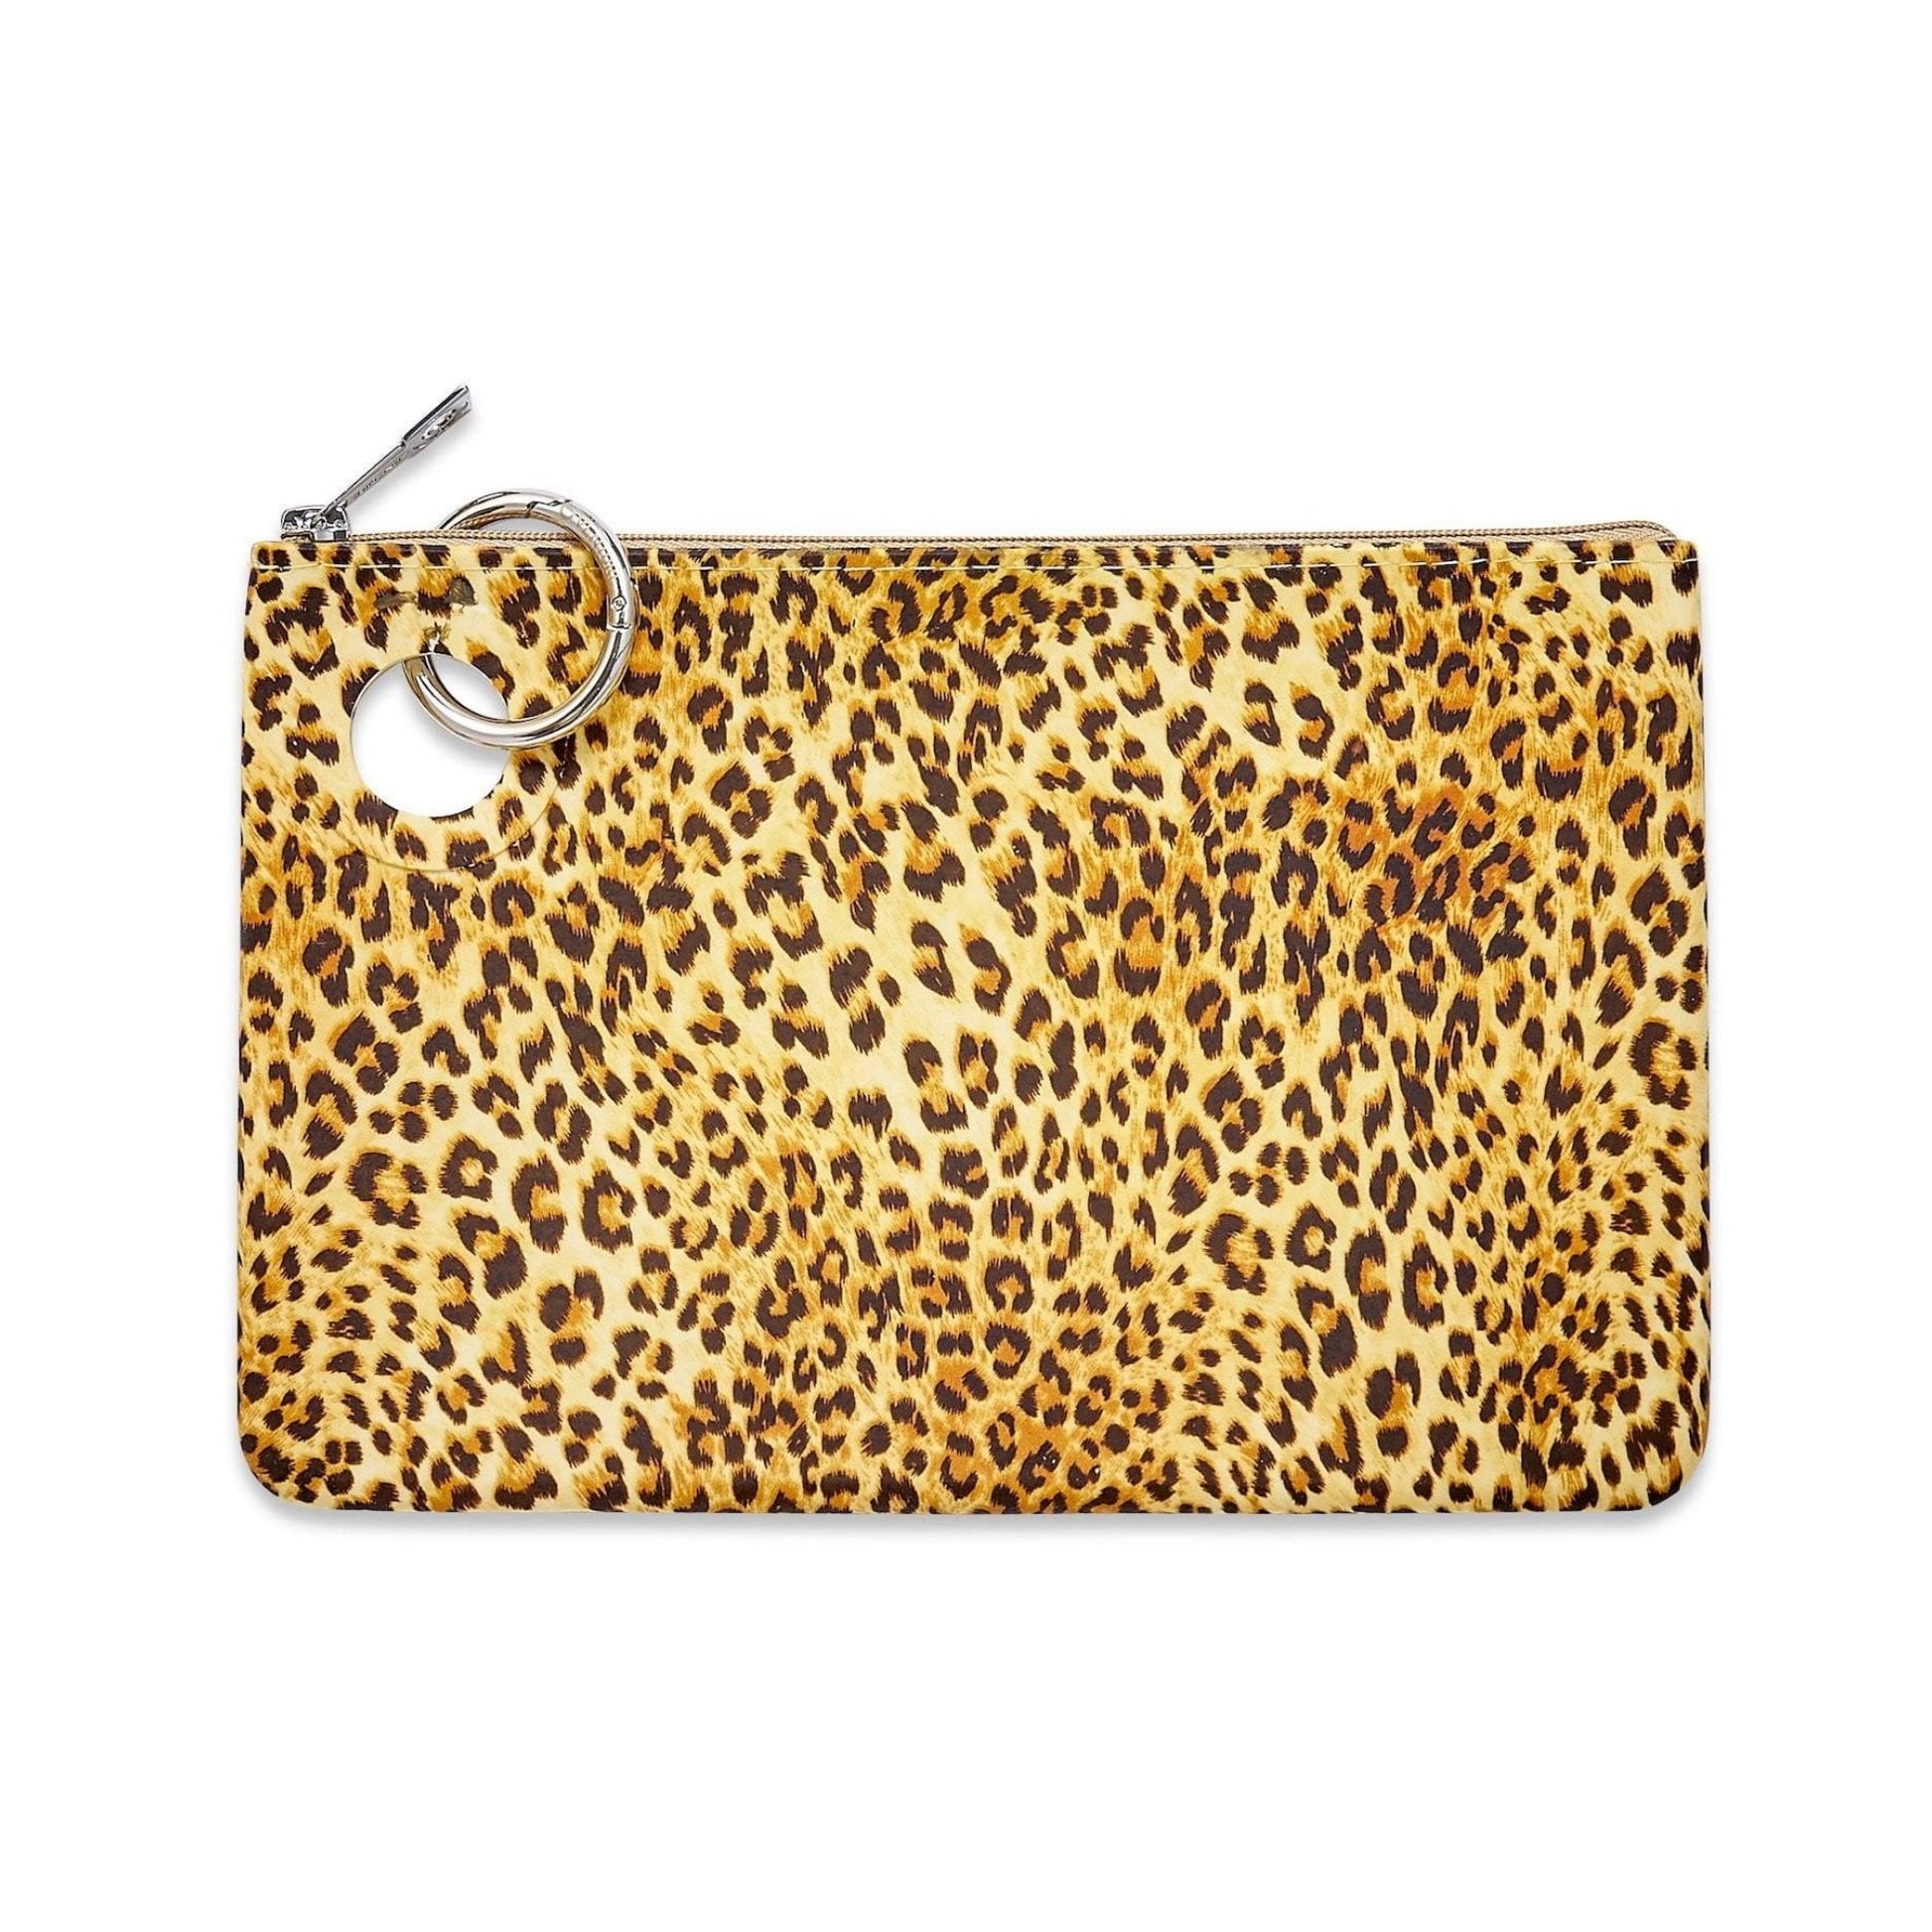 Large Silicone Pouch in Cheetah Print Silicone with a silver carabiner.